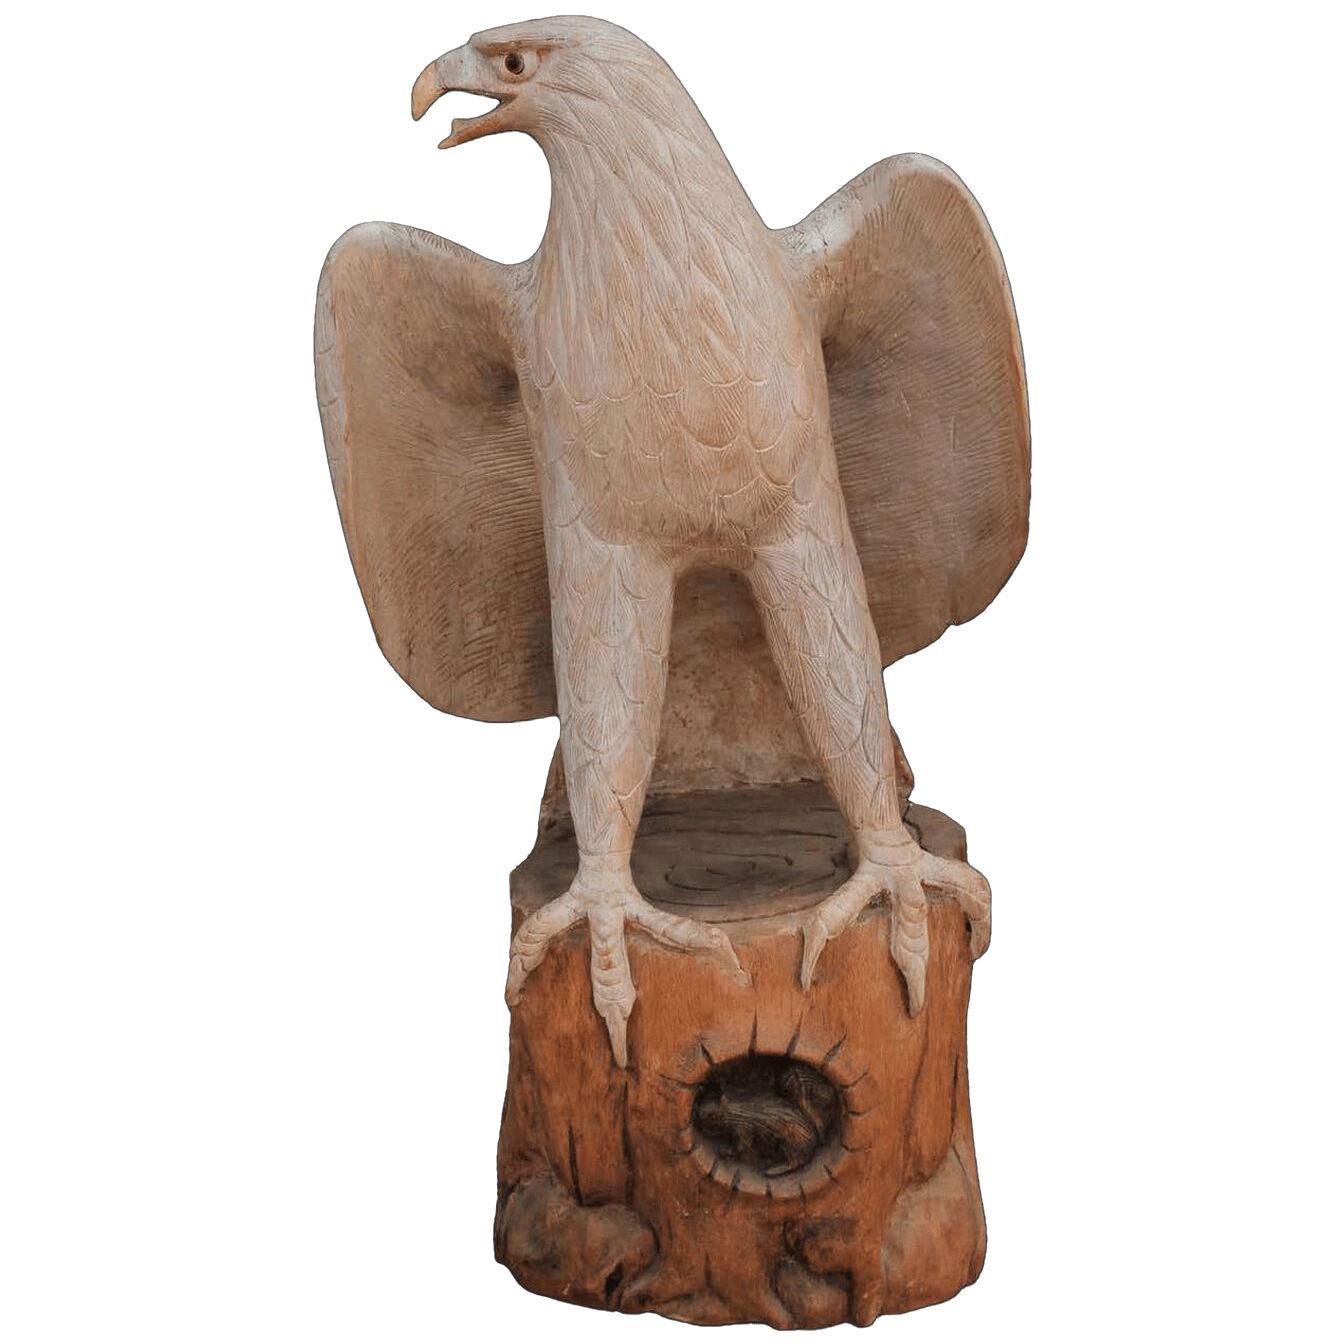 Hand Carved Naturalistic Wooden White Eagle Statue / Wildlife Sculpture 20th C.